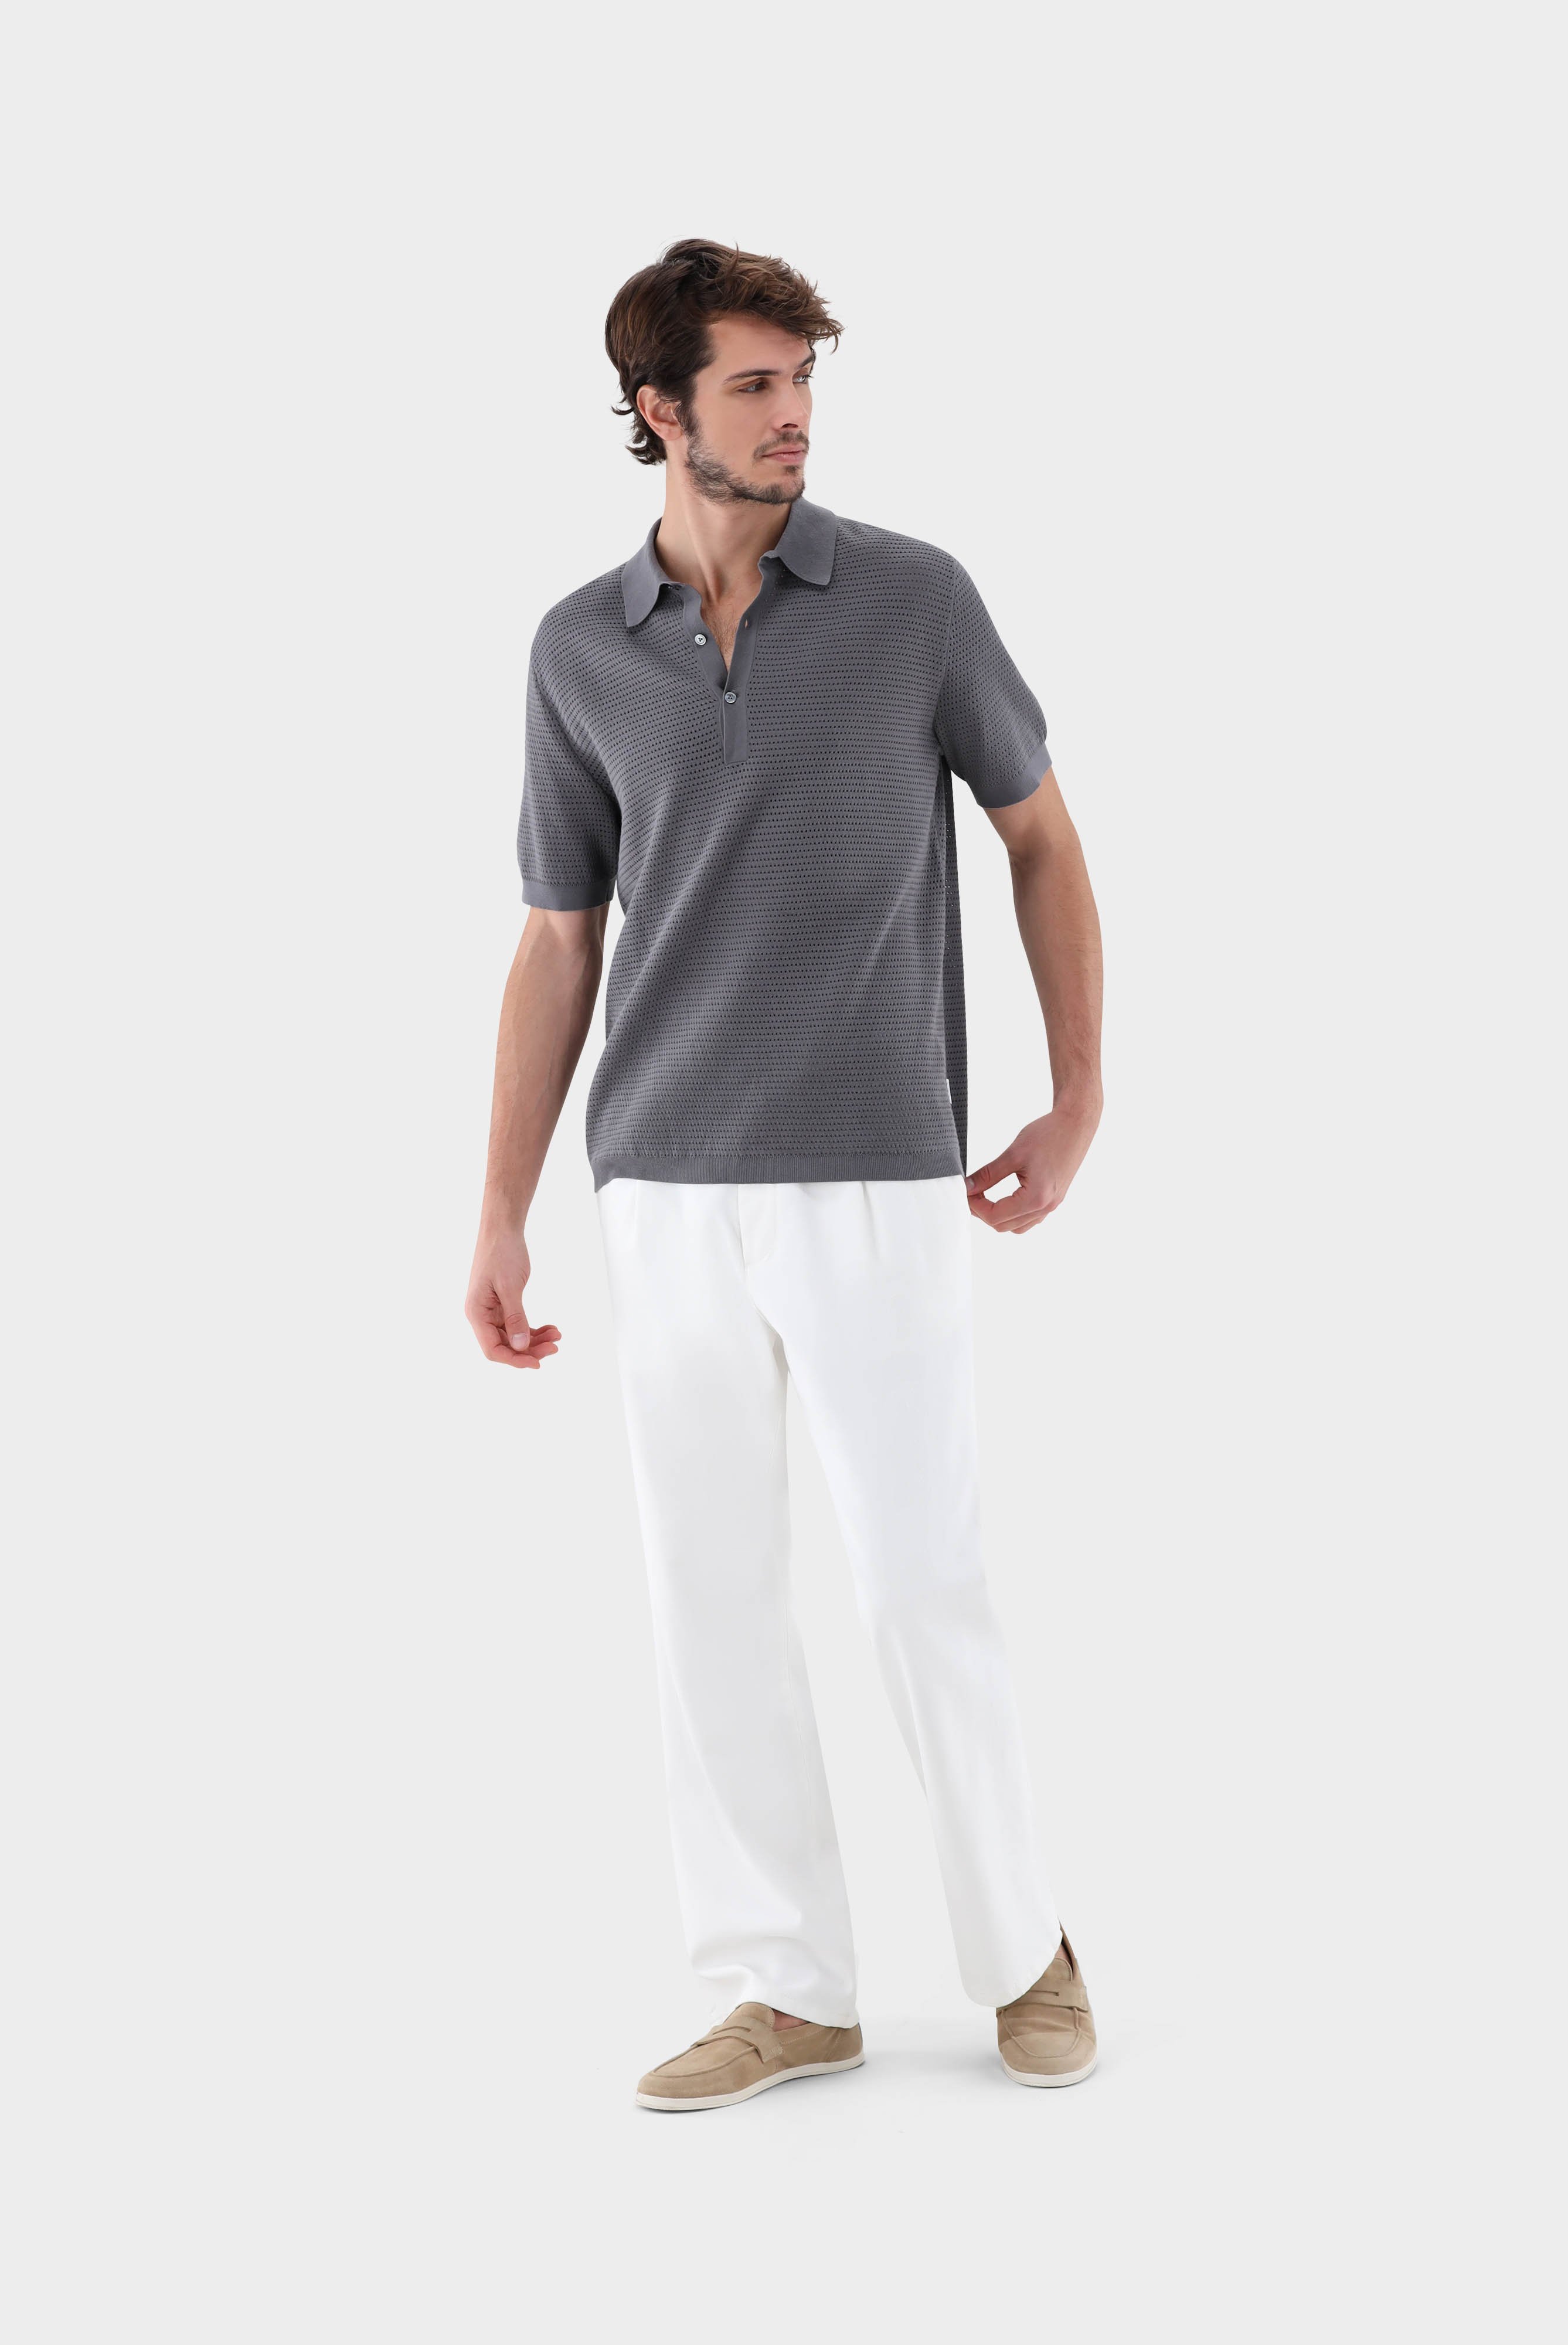 Poloshirts+Polo Shirt with Mesh Structure in Air Cotton+82.8651..S00267.070.L